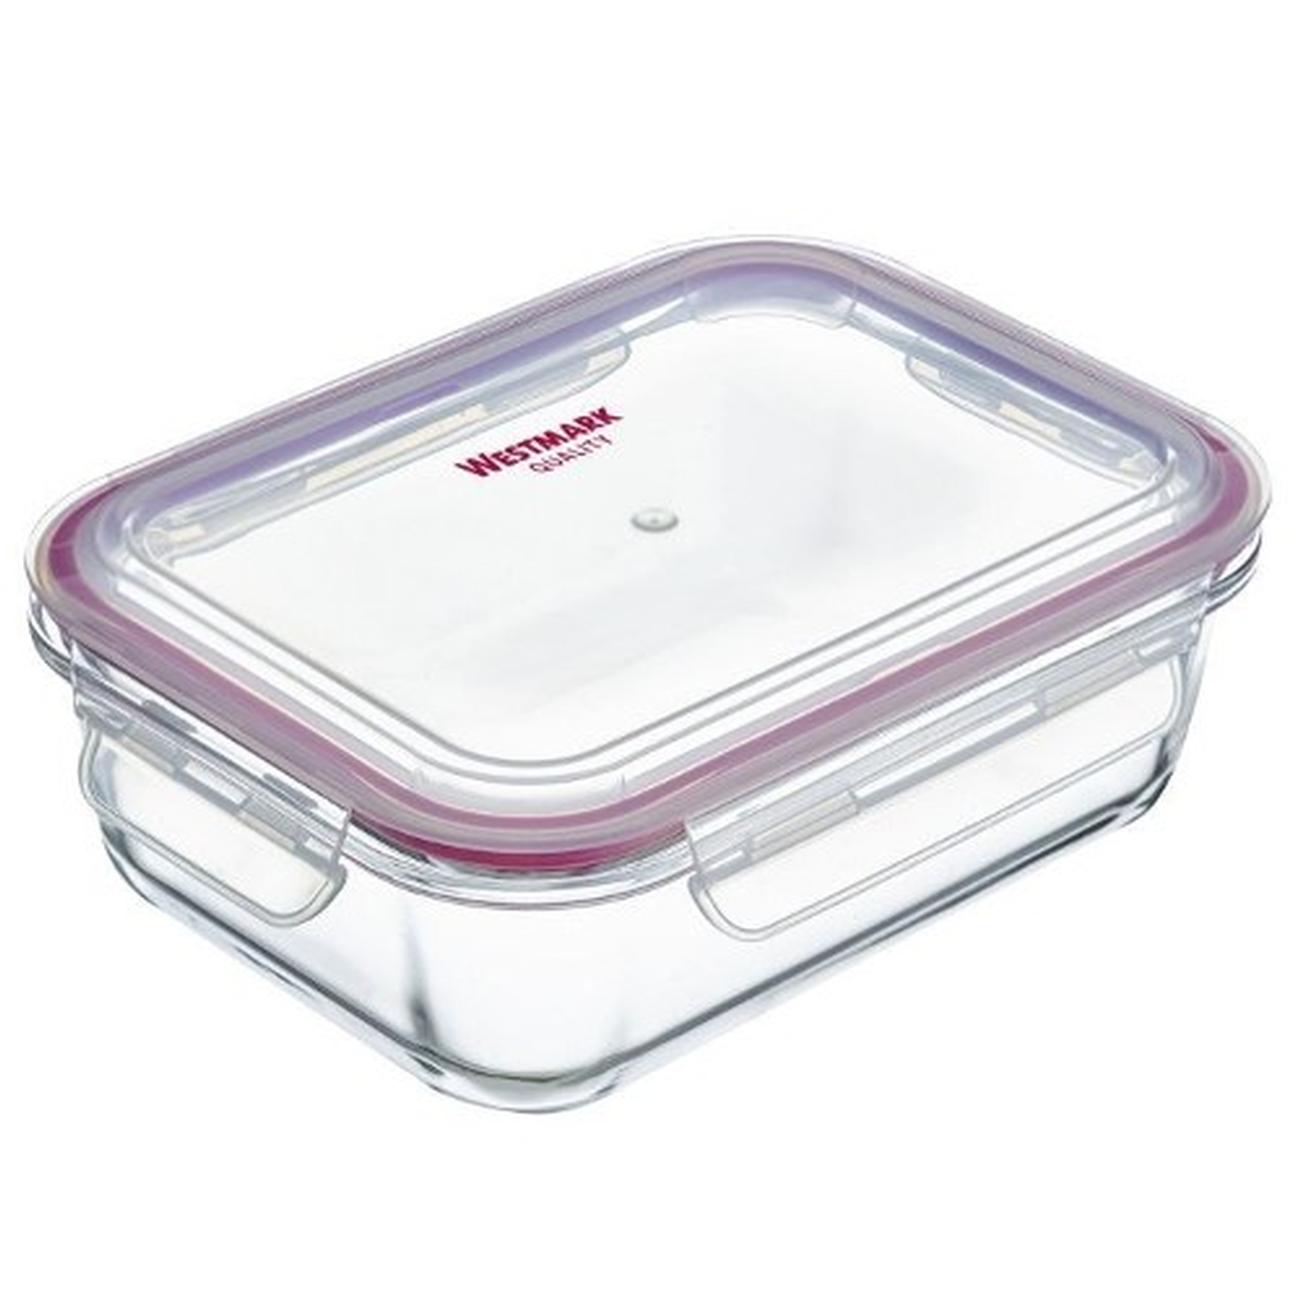 westmark-glass-container-1040ml - Westmark Glass Food Storage 1040ml